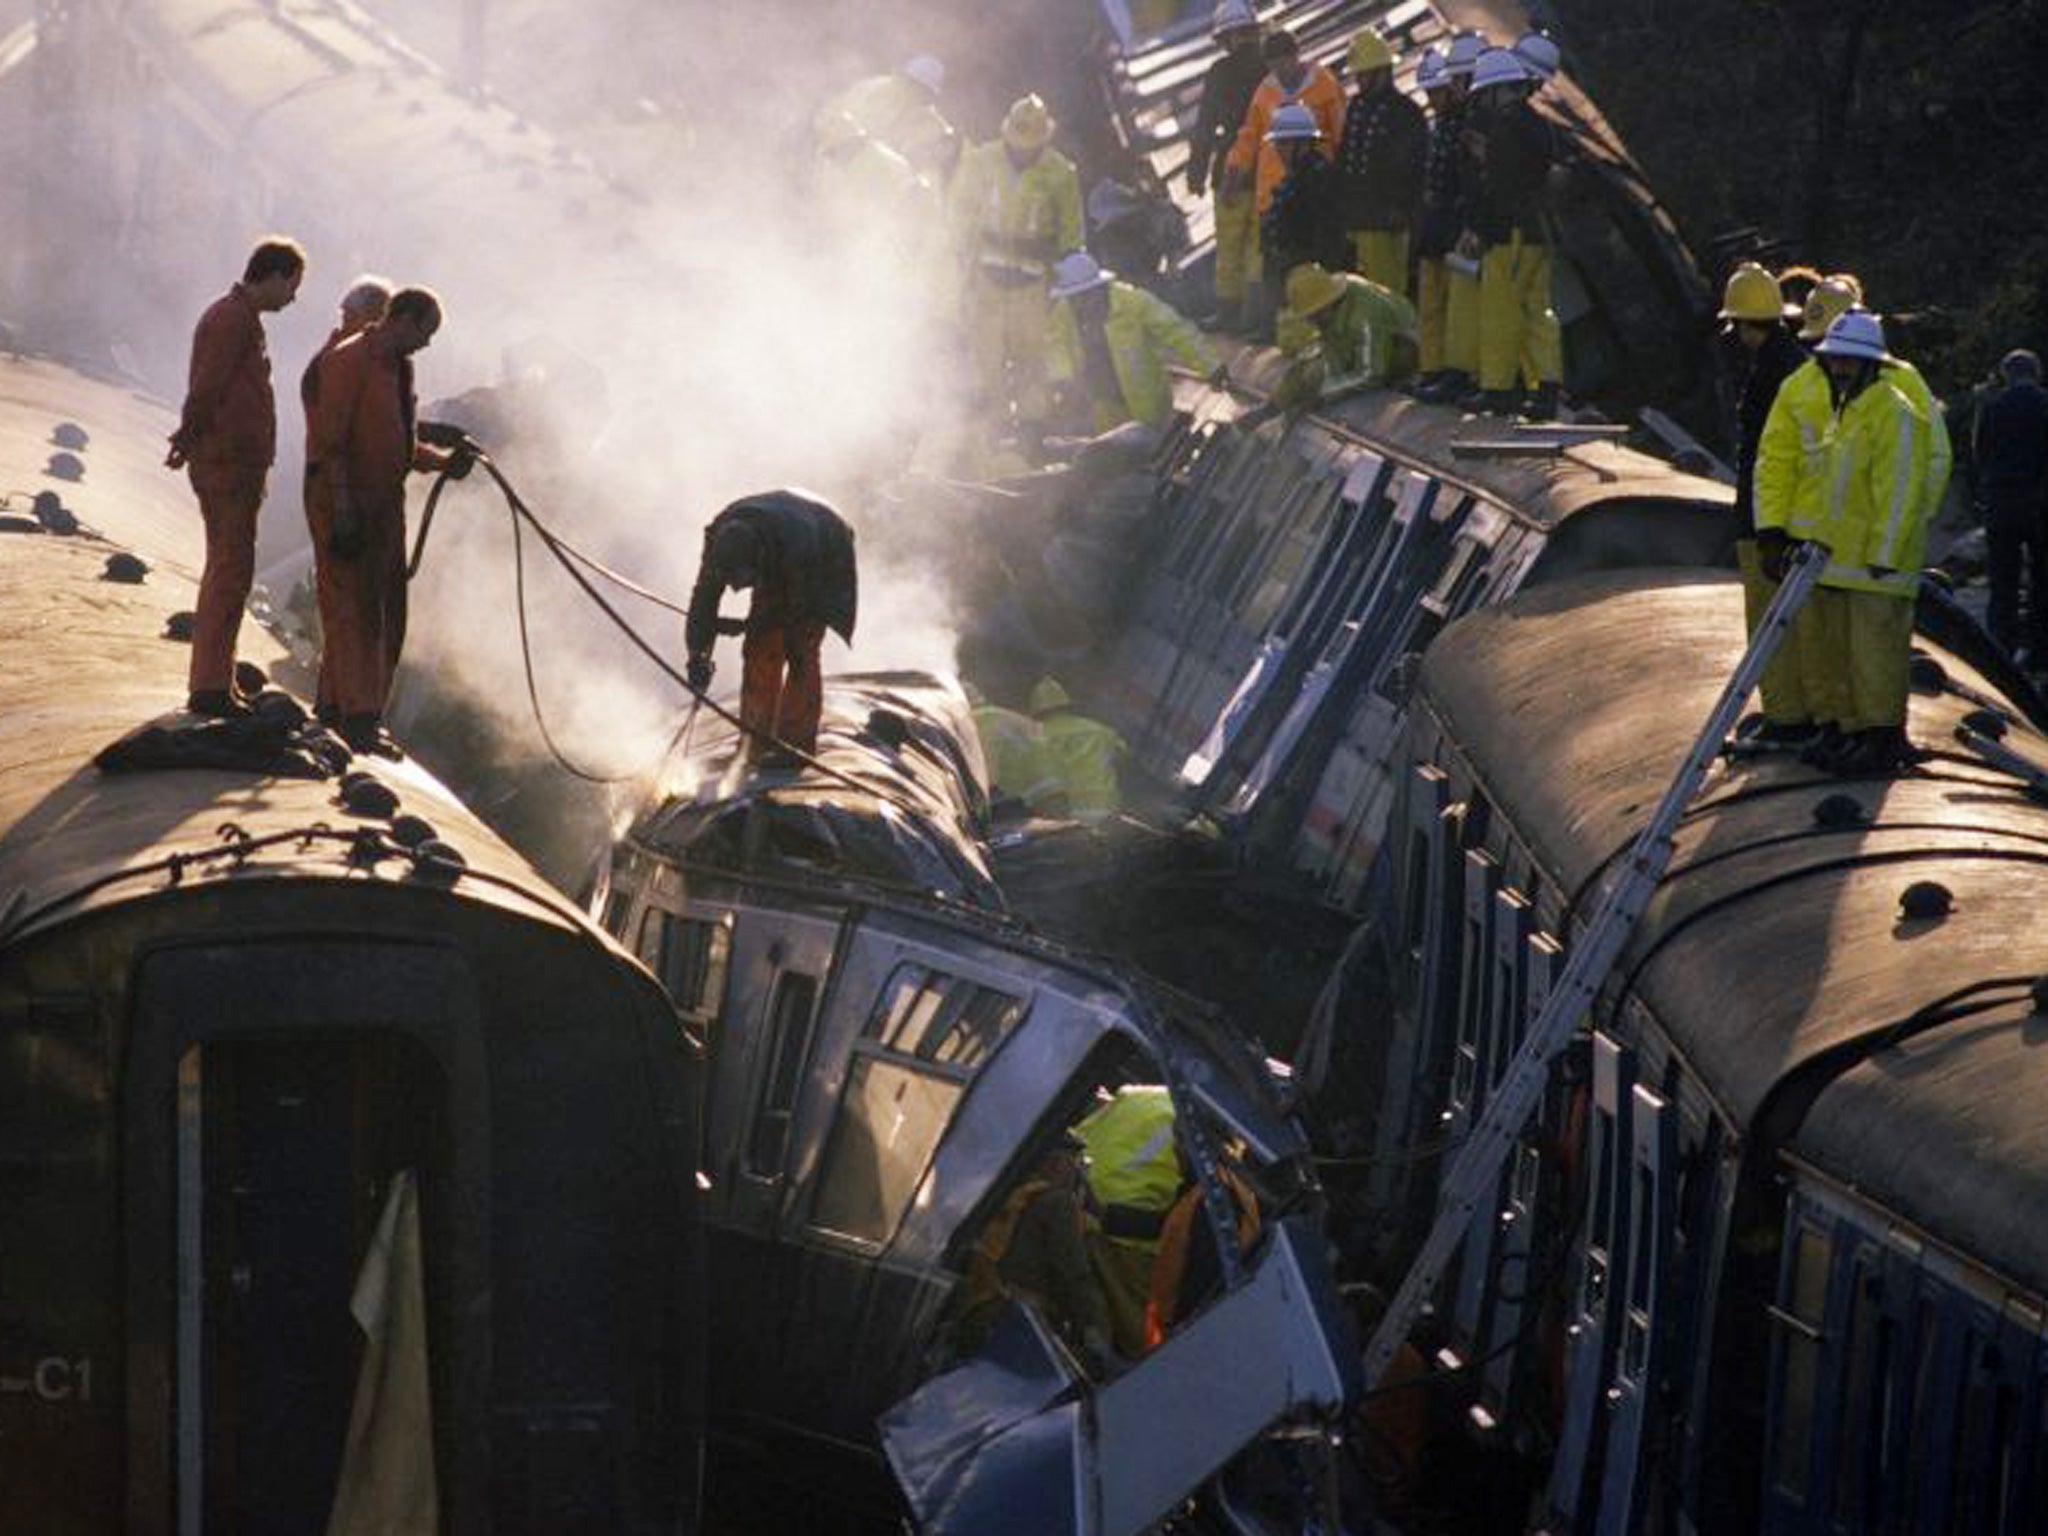 Flashback to 12 December 1988: the scene at the Clapham rail disaster, survivors today attended a simple service of remembrance